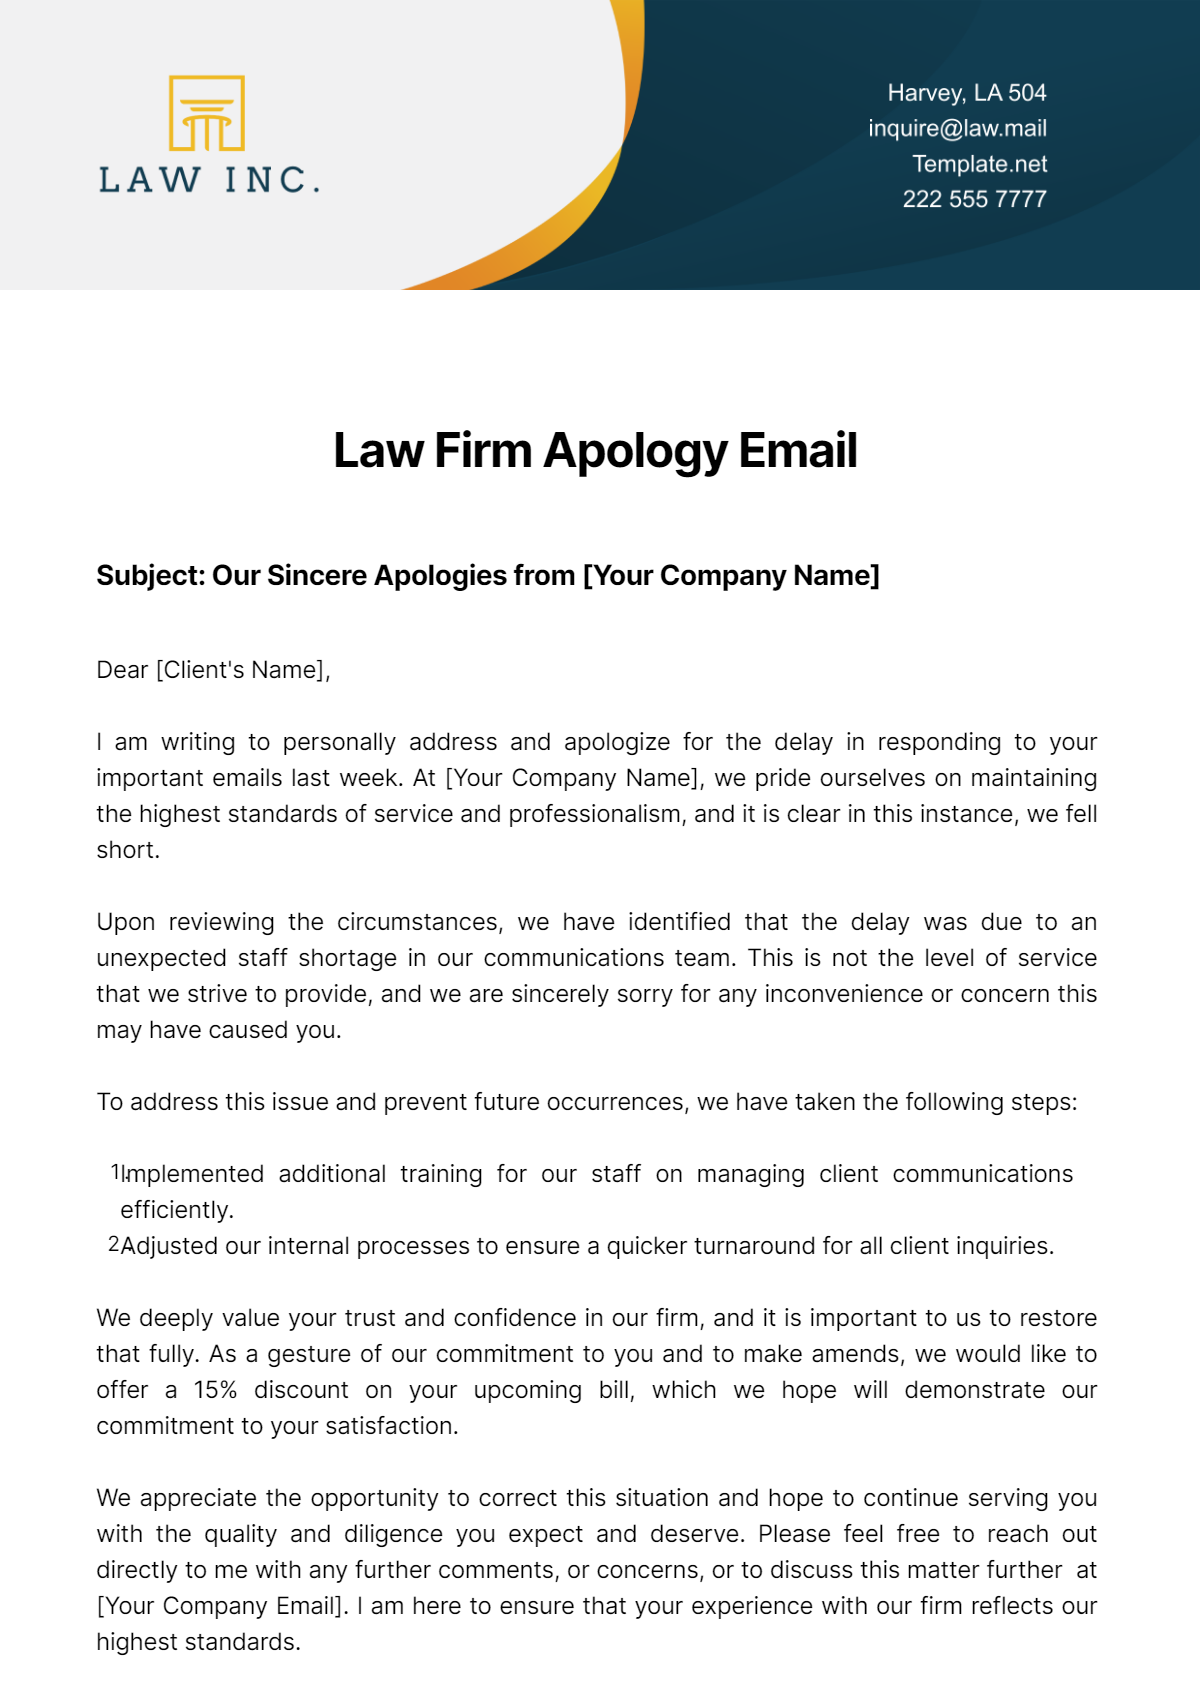 Law Firm Apology Email Template